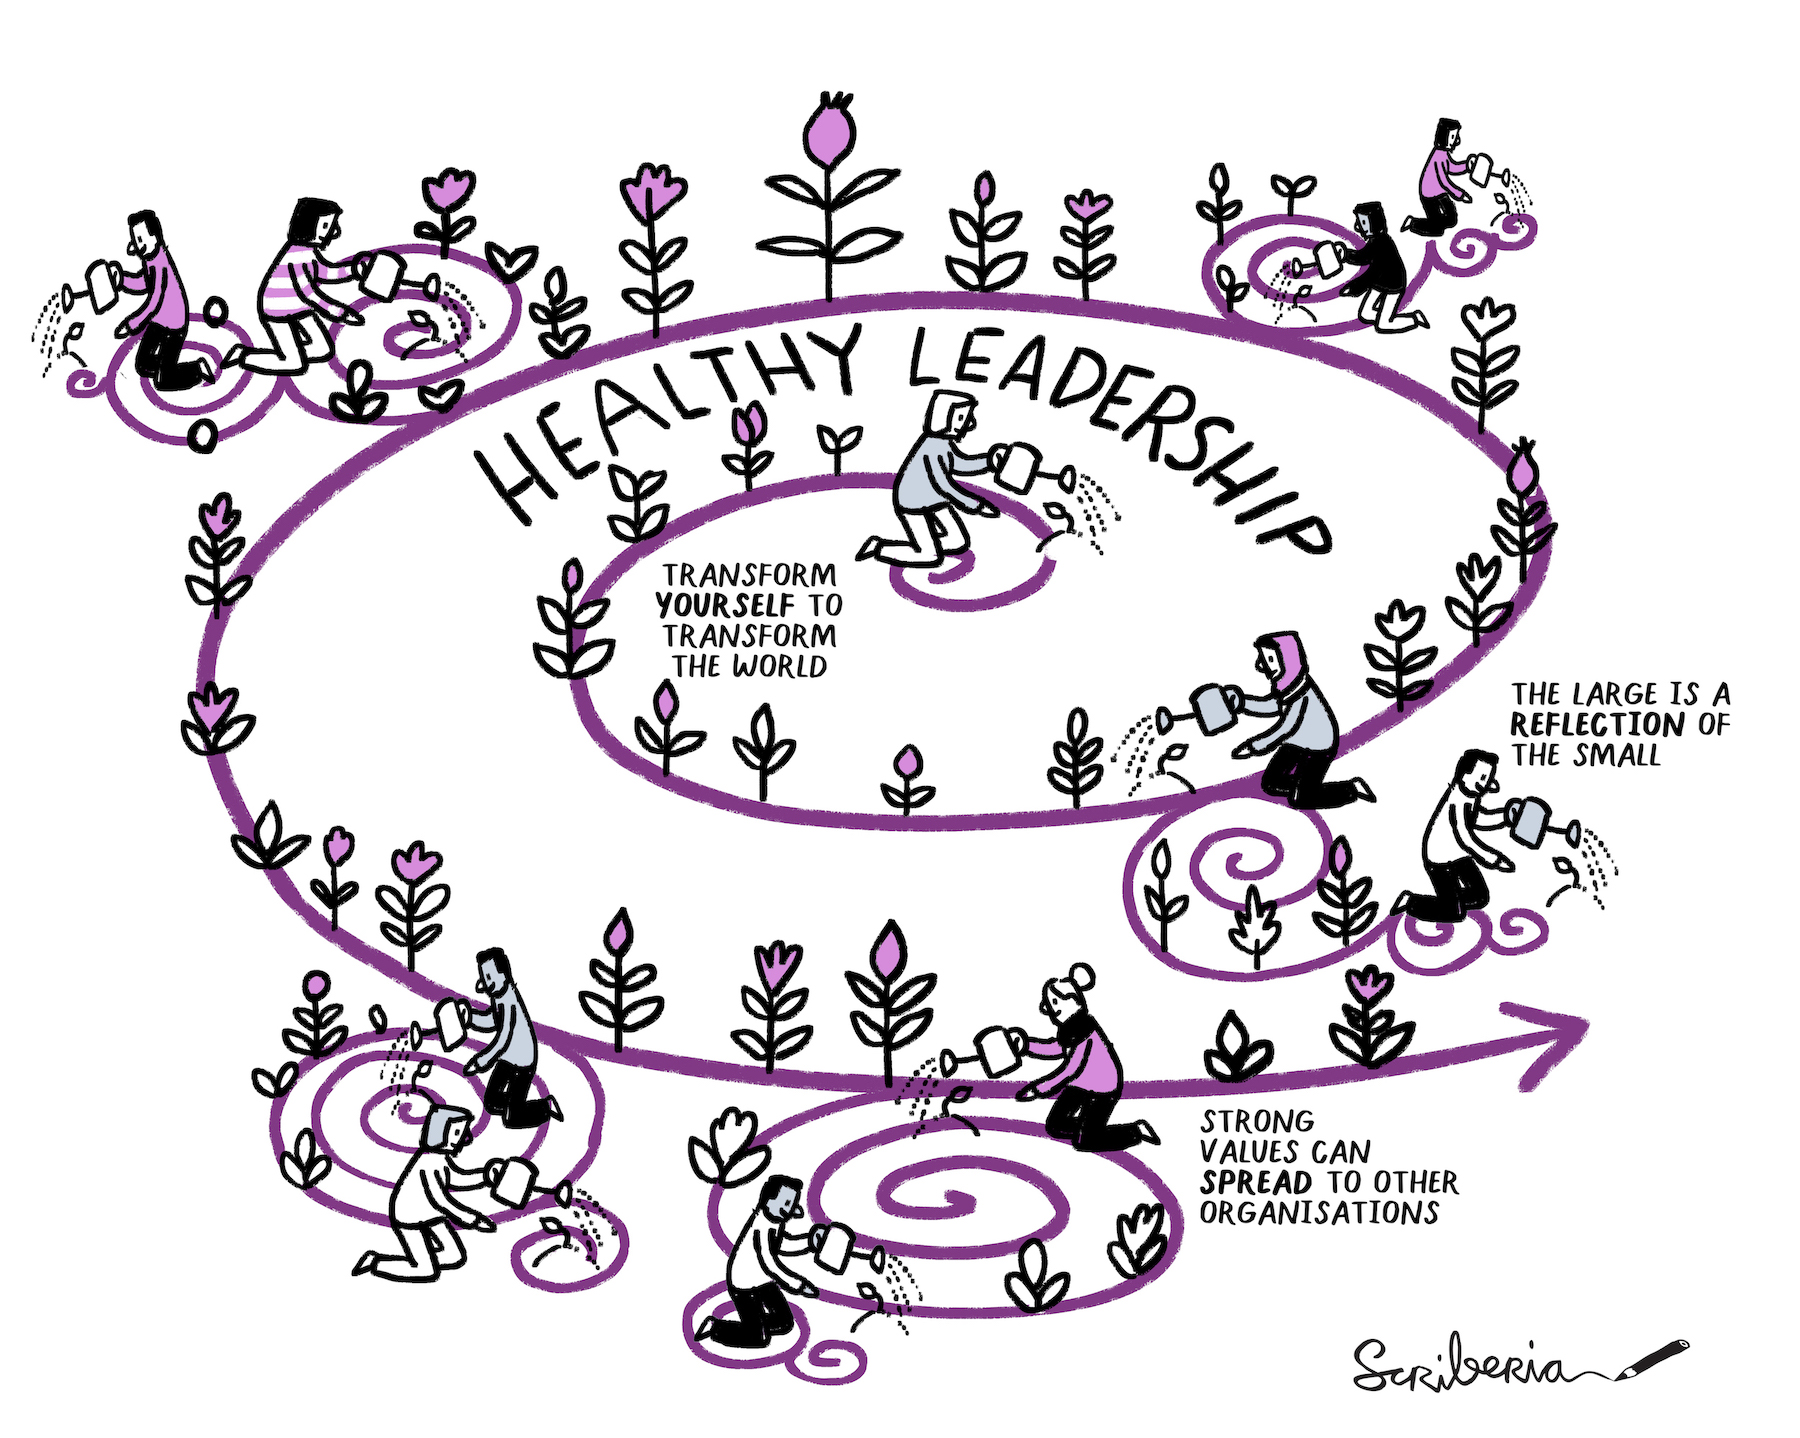 Healthy leadership is illustrated as a fractal where persons water growing flowers. The image includes quotes by Adrienne Maree Brown that state to transform yourself to transform the world, the large is a reflection of the small, and strong values can spread to other organisations.